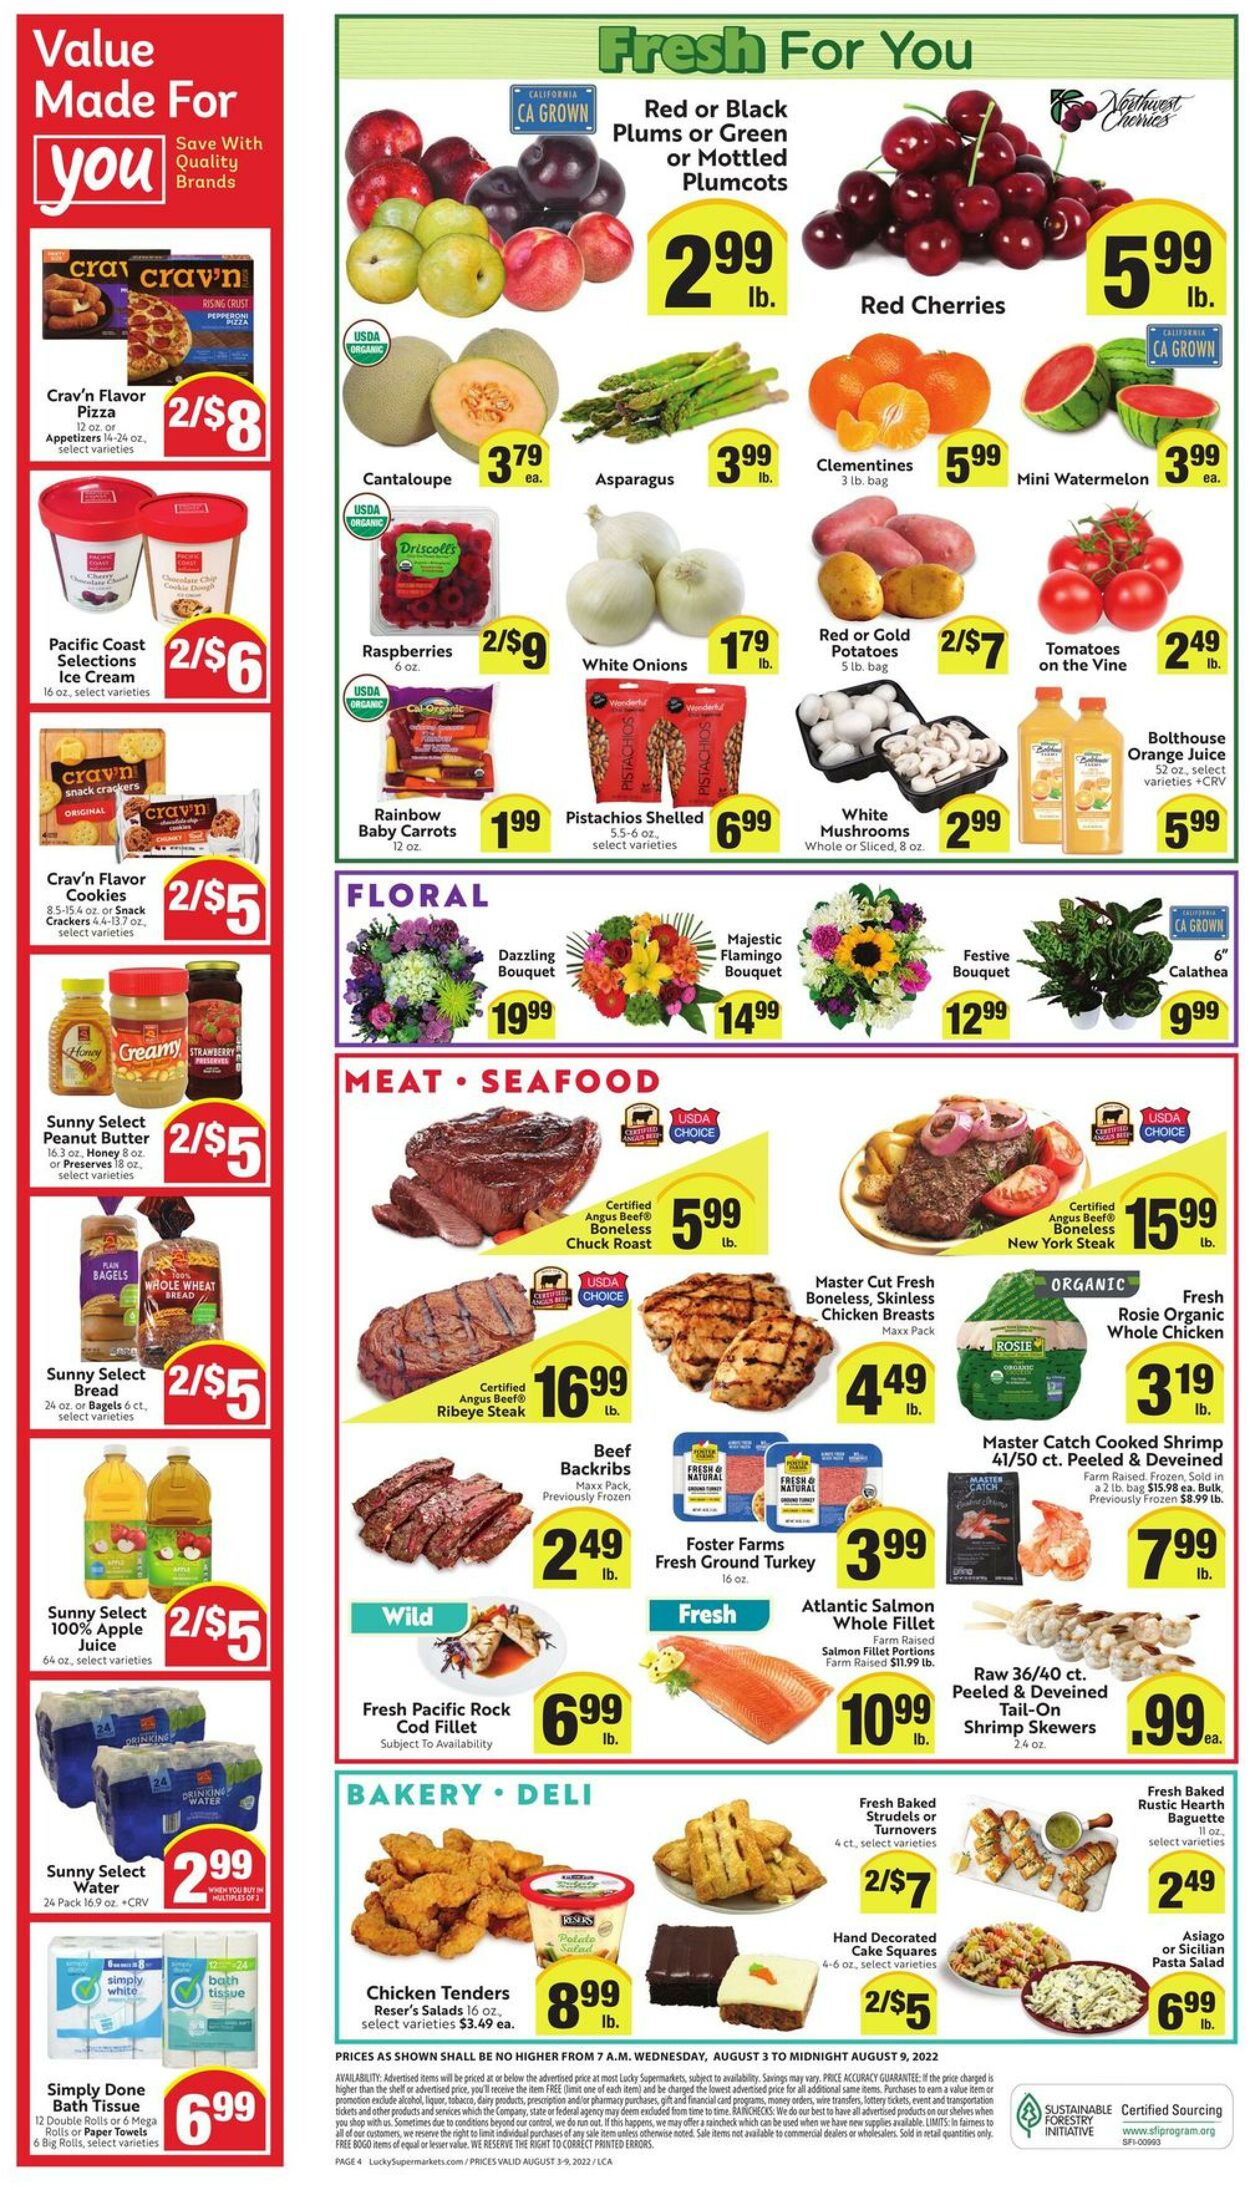 Weekly ad Lucky Supermarkets 08/03/2022 - 08/09/2022